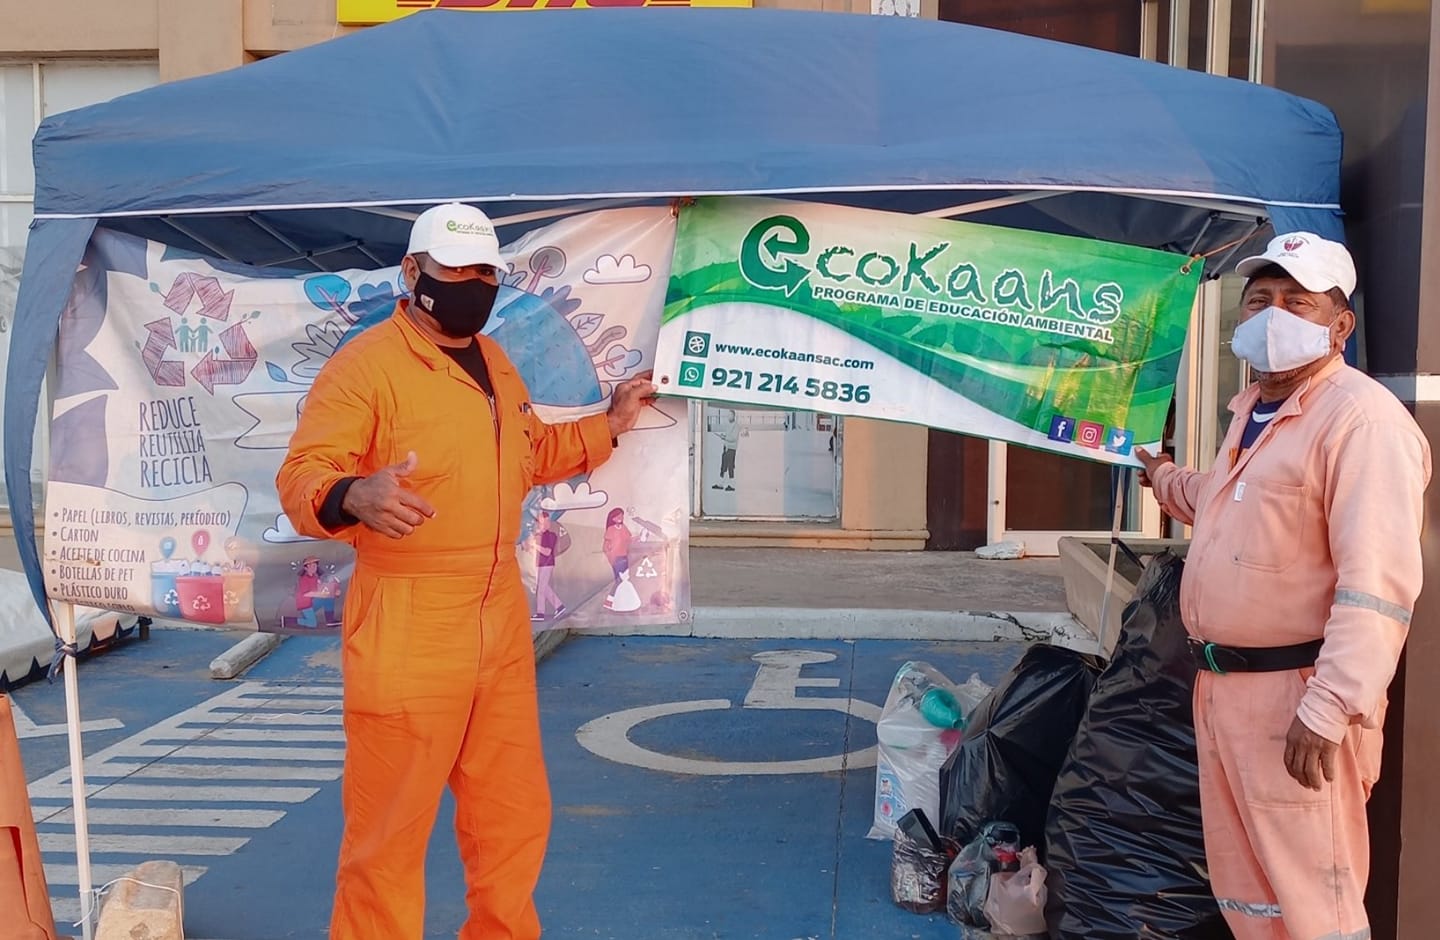 Recycling and waste collection with Ecokaans